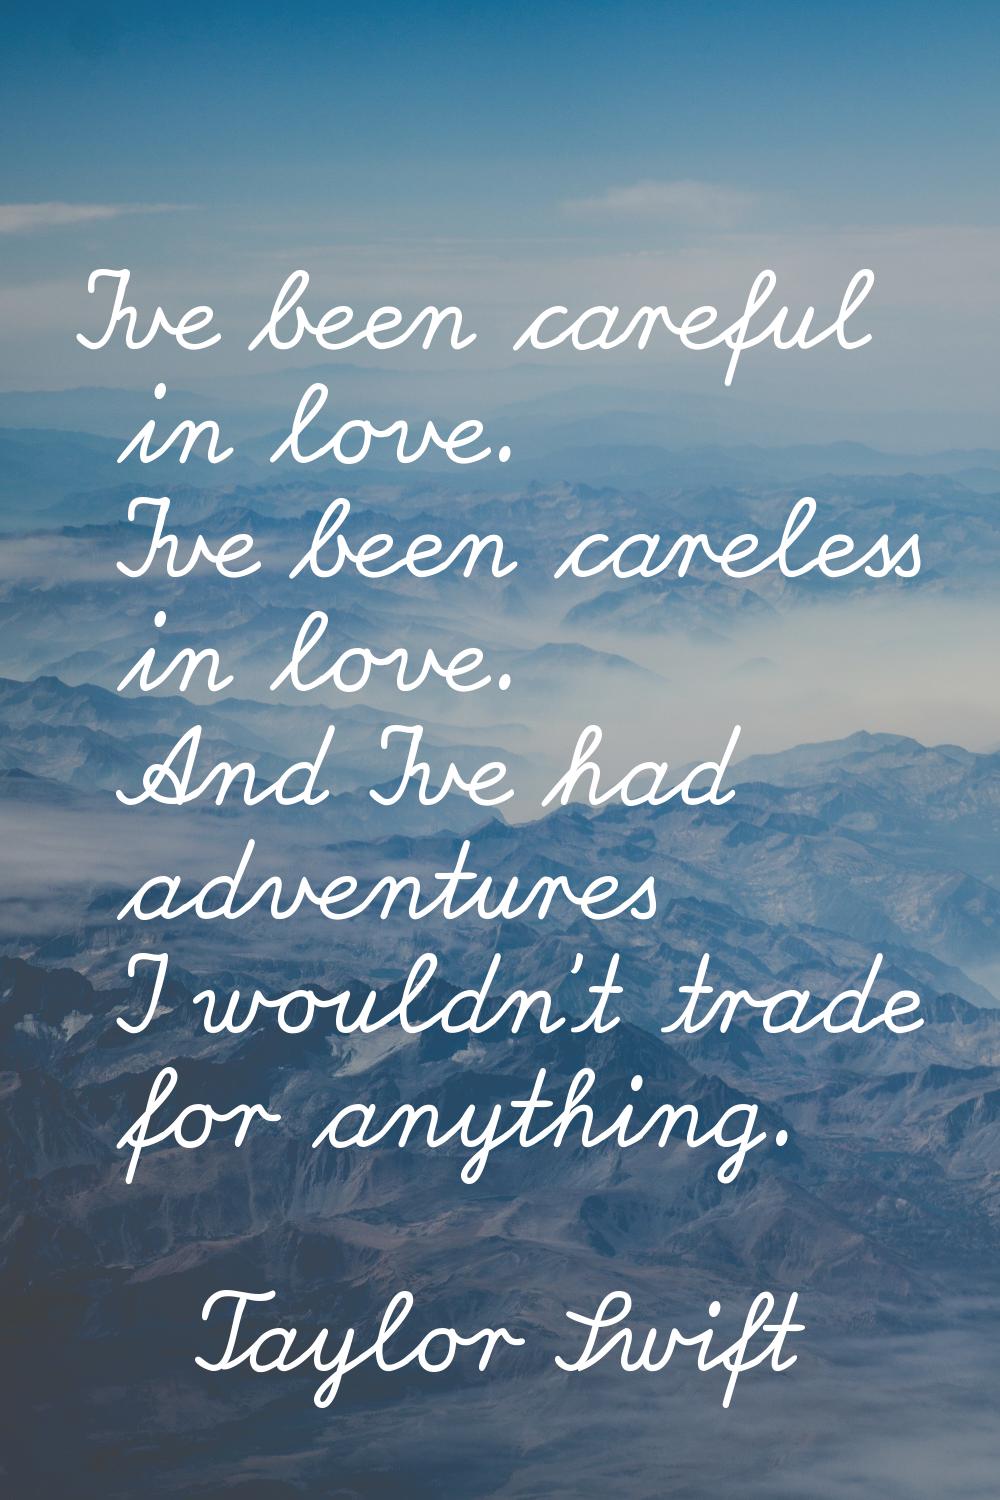 I've been careful in love. I've been careless in love. And I've had adventures I wouldn't trade for